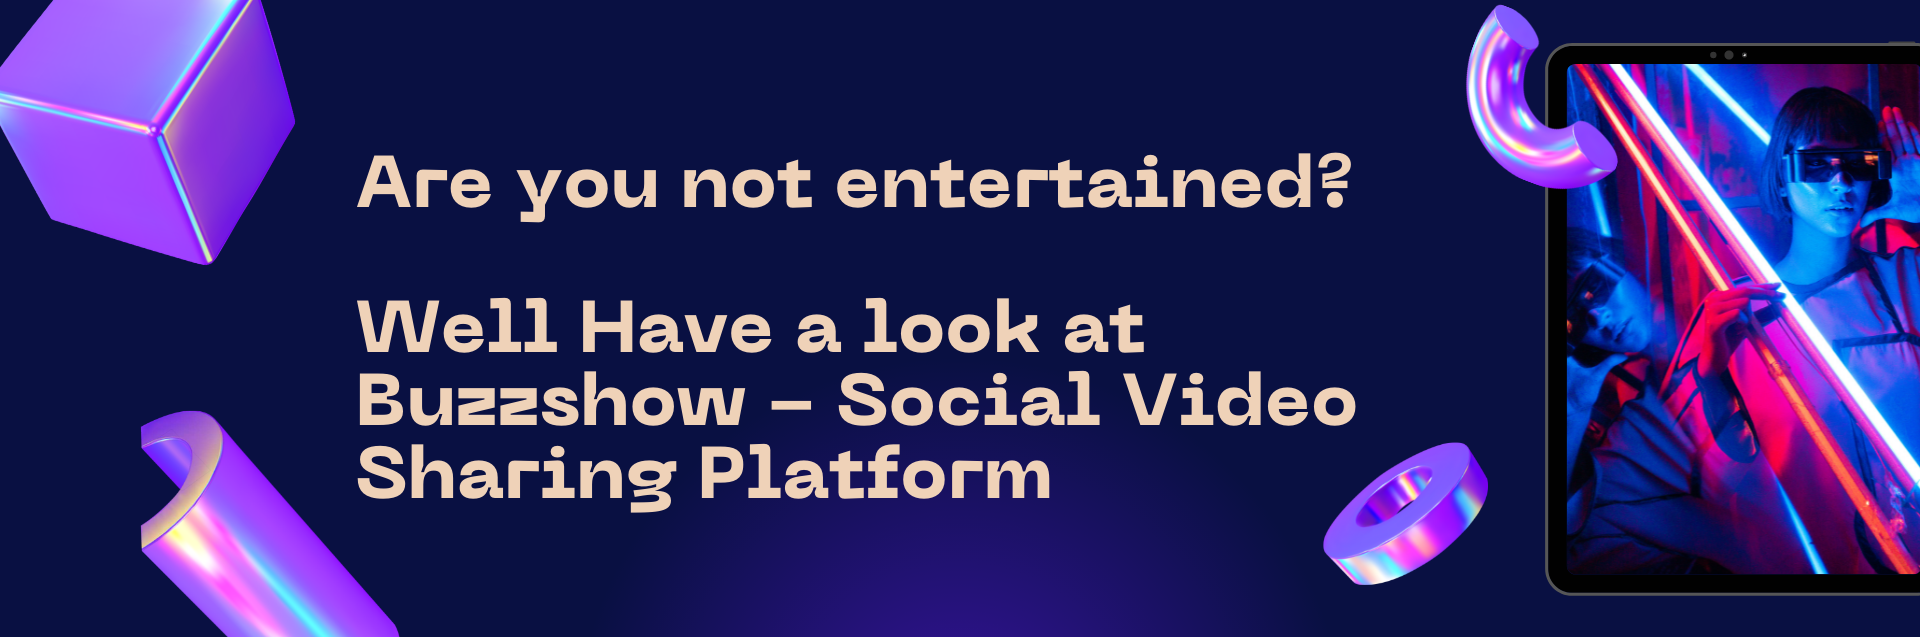 Are You Not Entertained? Well Have a Look at Buzzshow – Social Video Sharing Platform